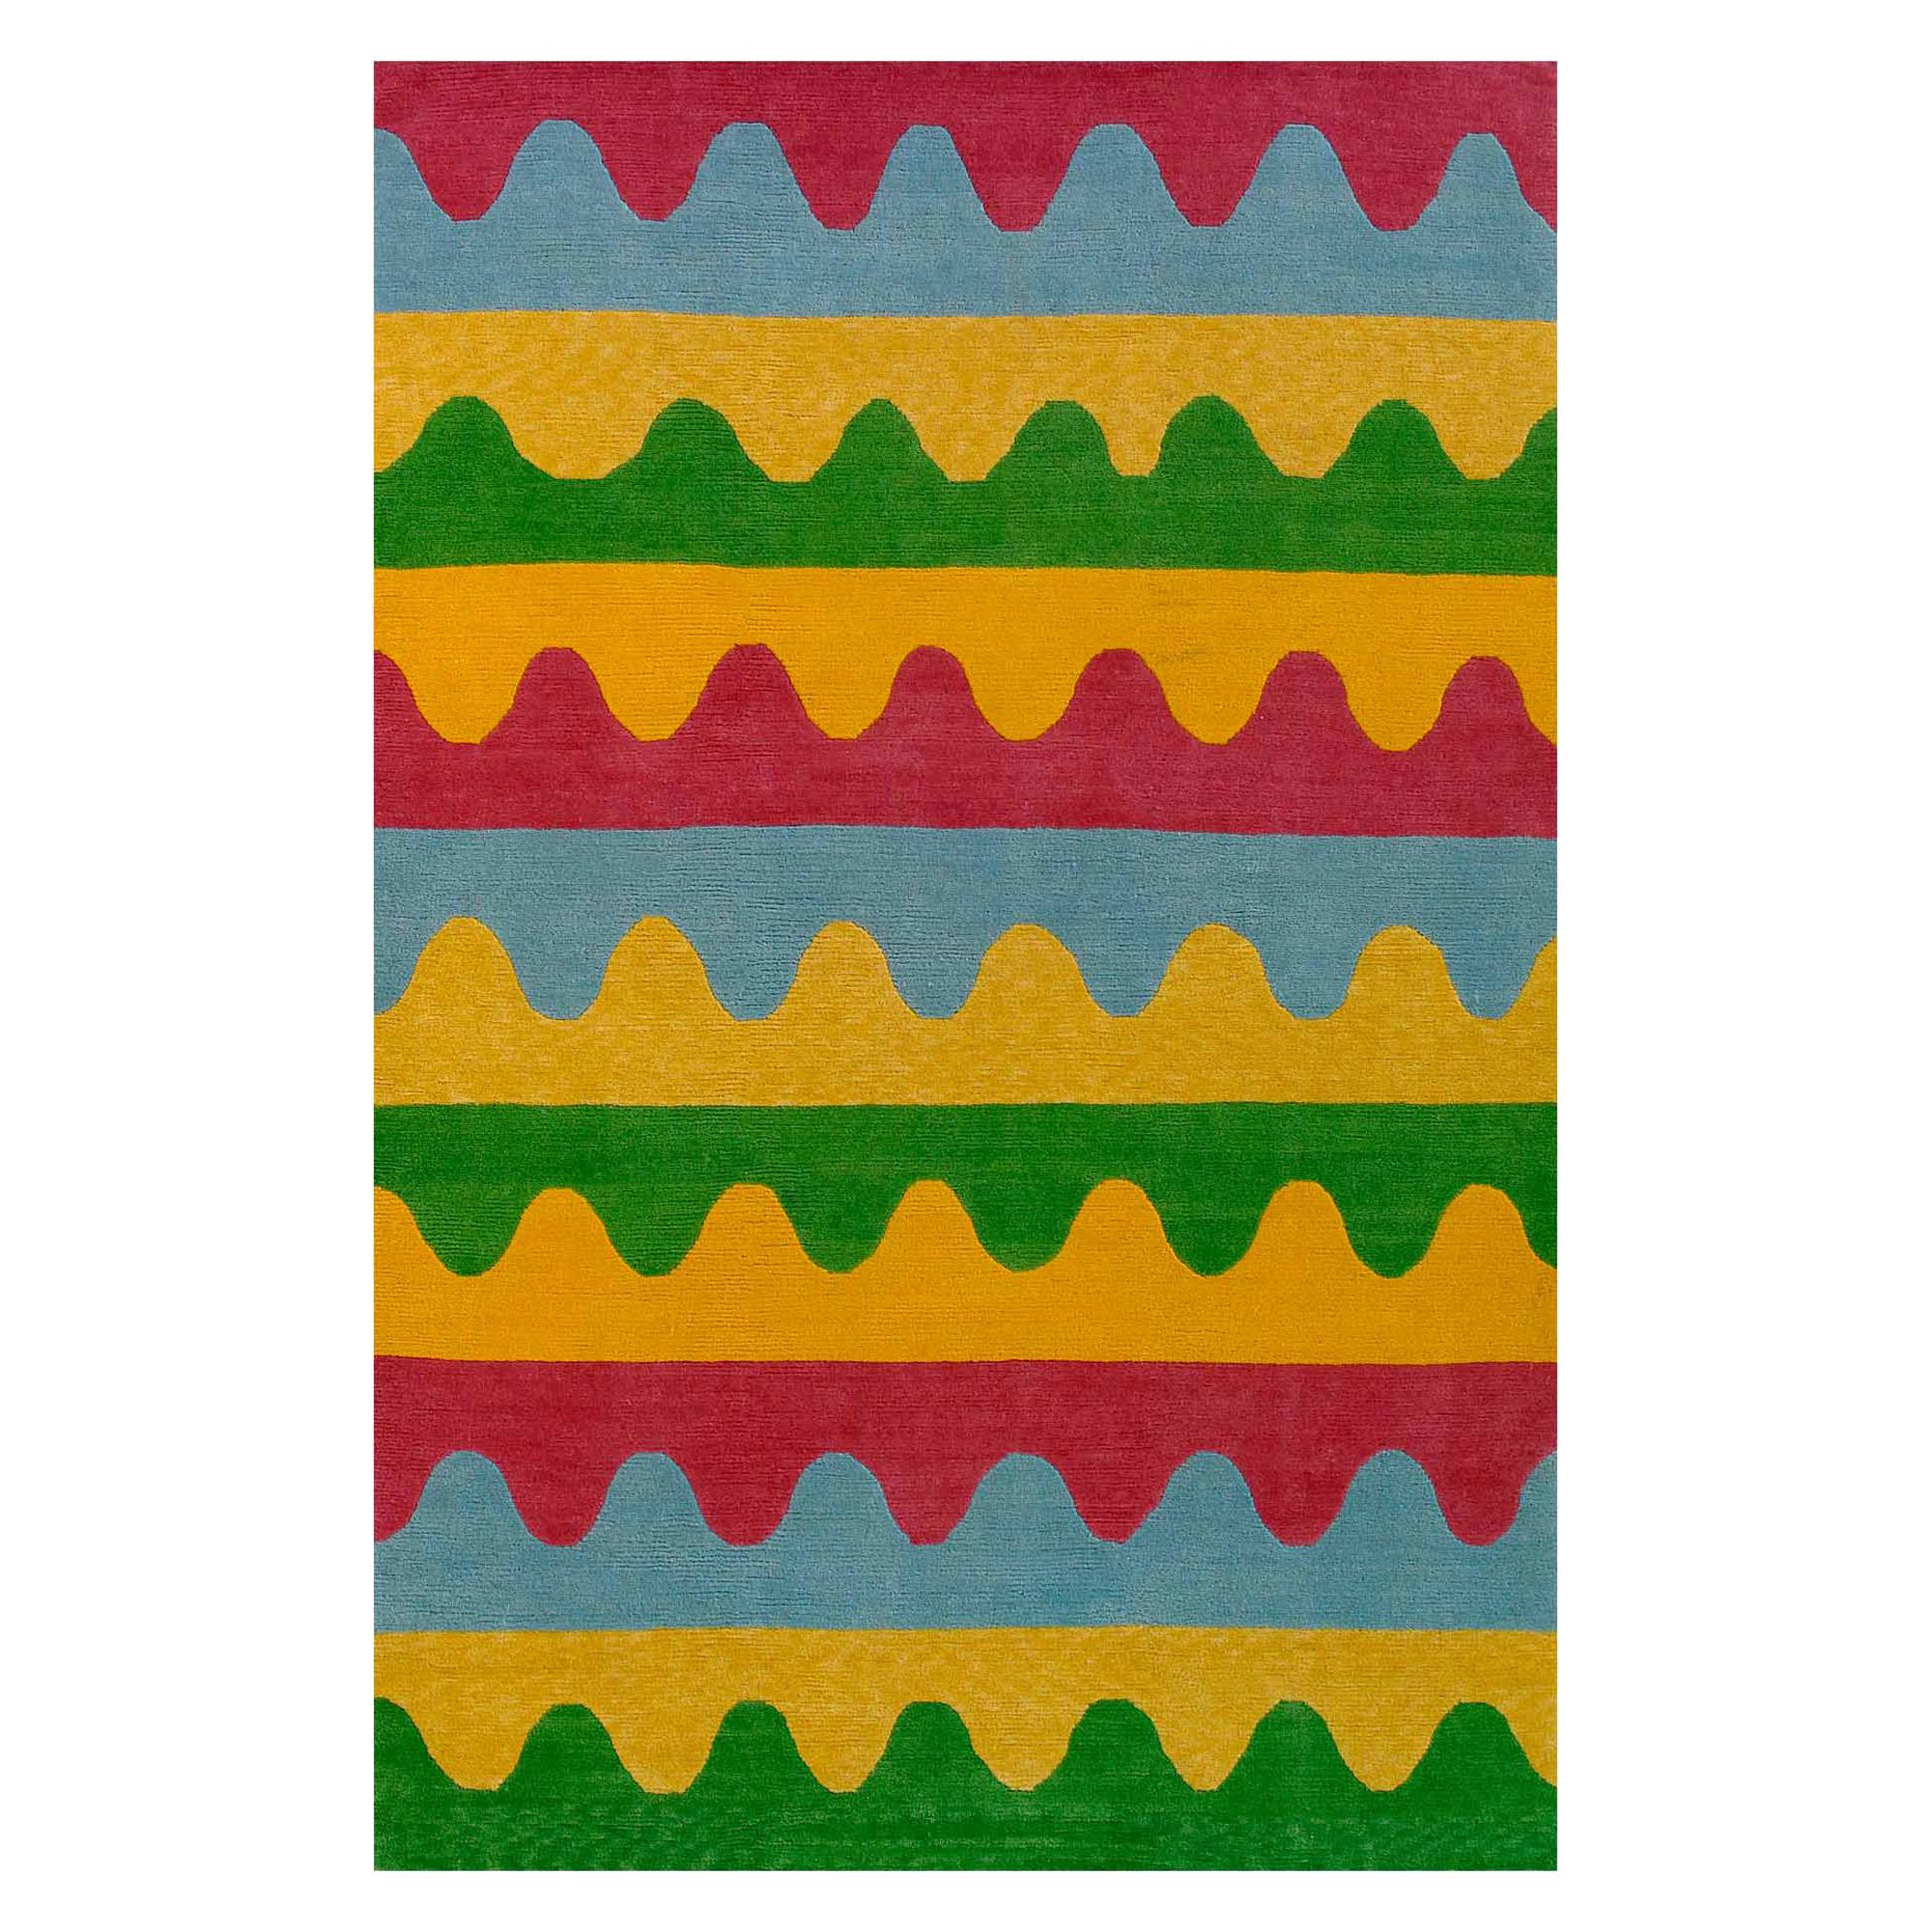 AM2 Woollen Carpet by Alessandro Mendini for Post Design Collection/Memphis For Sale